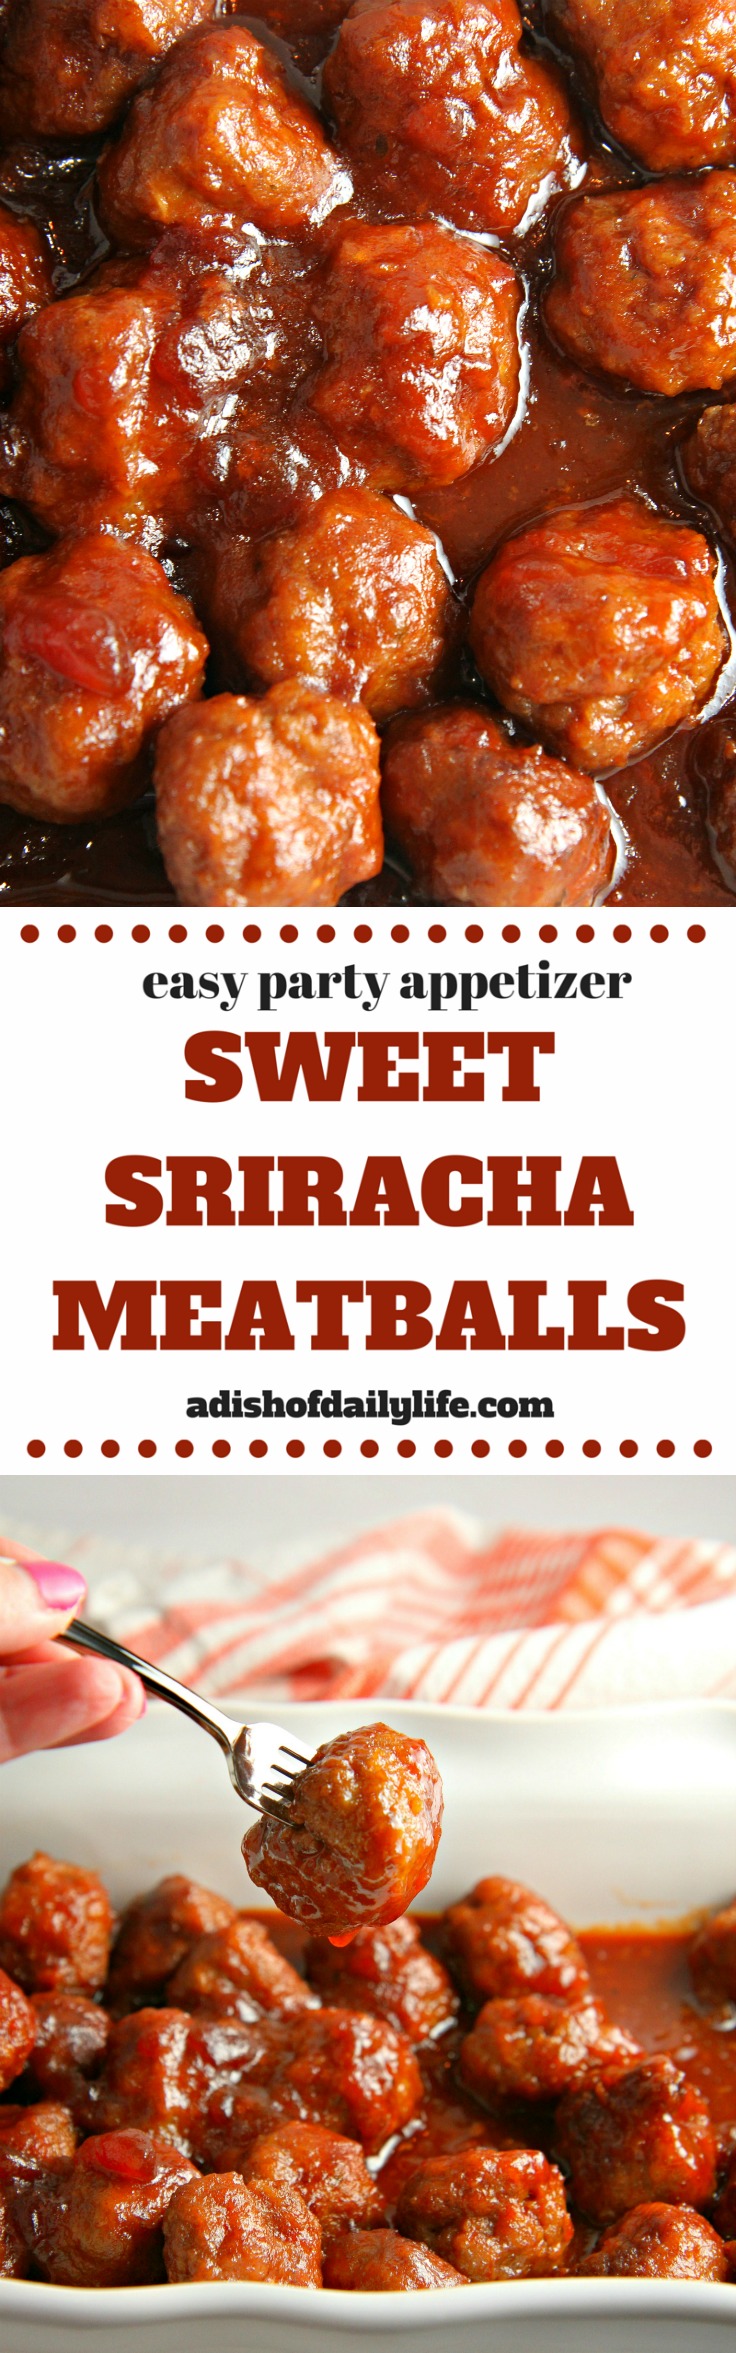 Looking for an easy meatball crockpot appetizer for game day? Sweet pairs with spicy in this Sweet Sriracha Meatballs recipe...the perfect addition to any party menu! You can even tone down the spiciness for a more kid friendly dish.